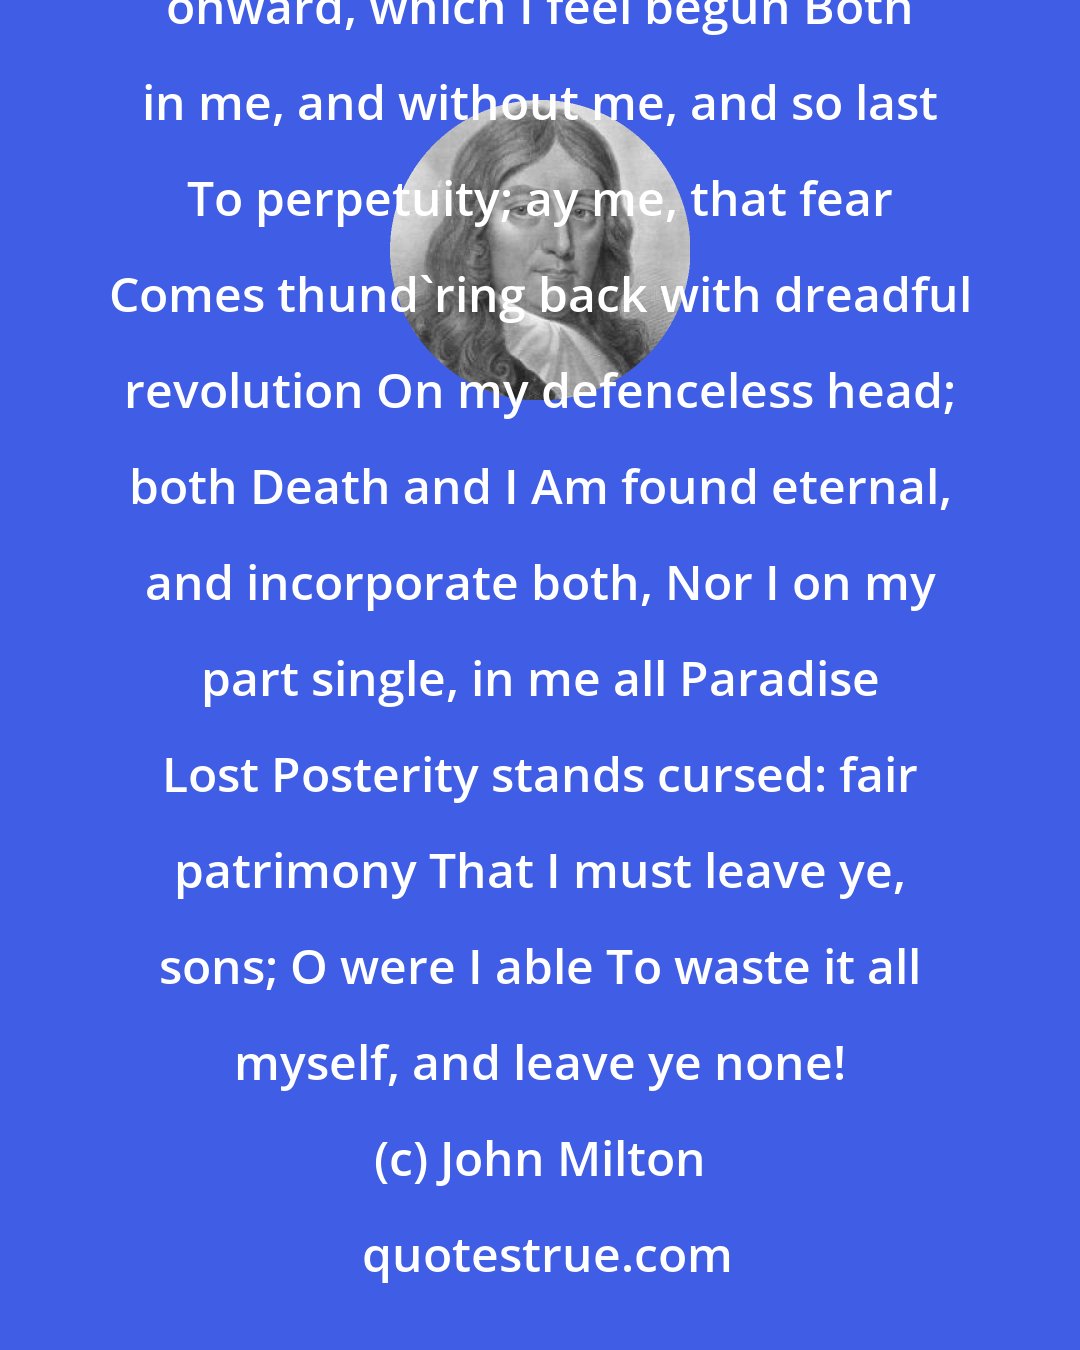 John Milton: But say That death be not one stroke, as I supposed, Bereaving sense, but endless misery From this day onward, which I feel begun Both in me, and without me, and so last To perpetuity; ay me, that fear Comes thund'ring back with dreadful revolution On my defenceless head; both Death and I Am found eternal, and incorporate both, Nor I on my part single, in me all Paradise Lost Posterity stands cursed: fair patrimony That I must leave ye, sons; O were I able To waste it all myself, and leave ye none!